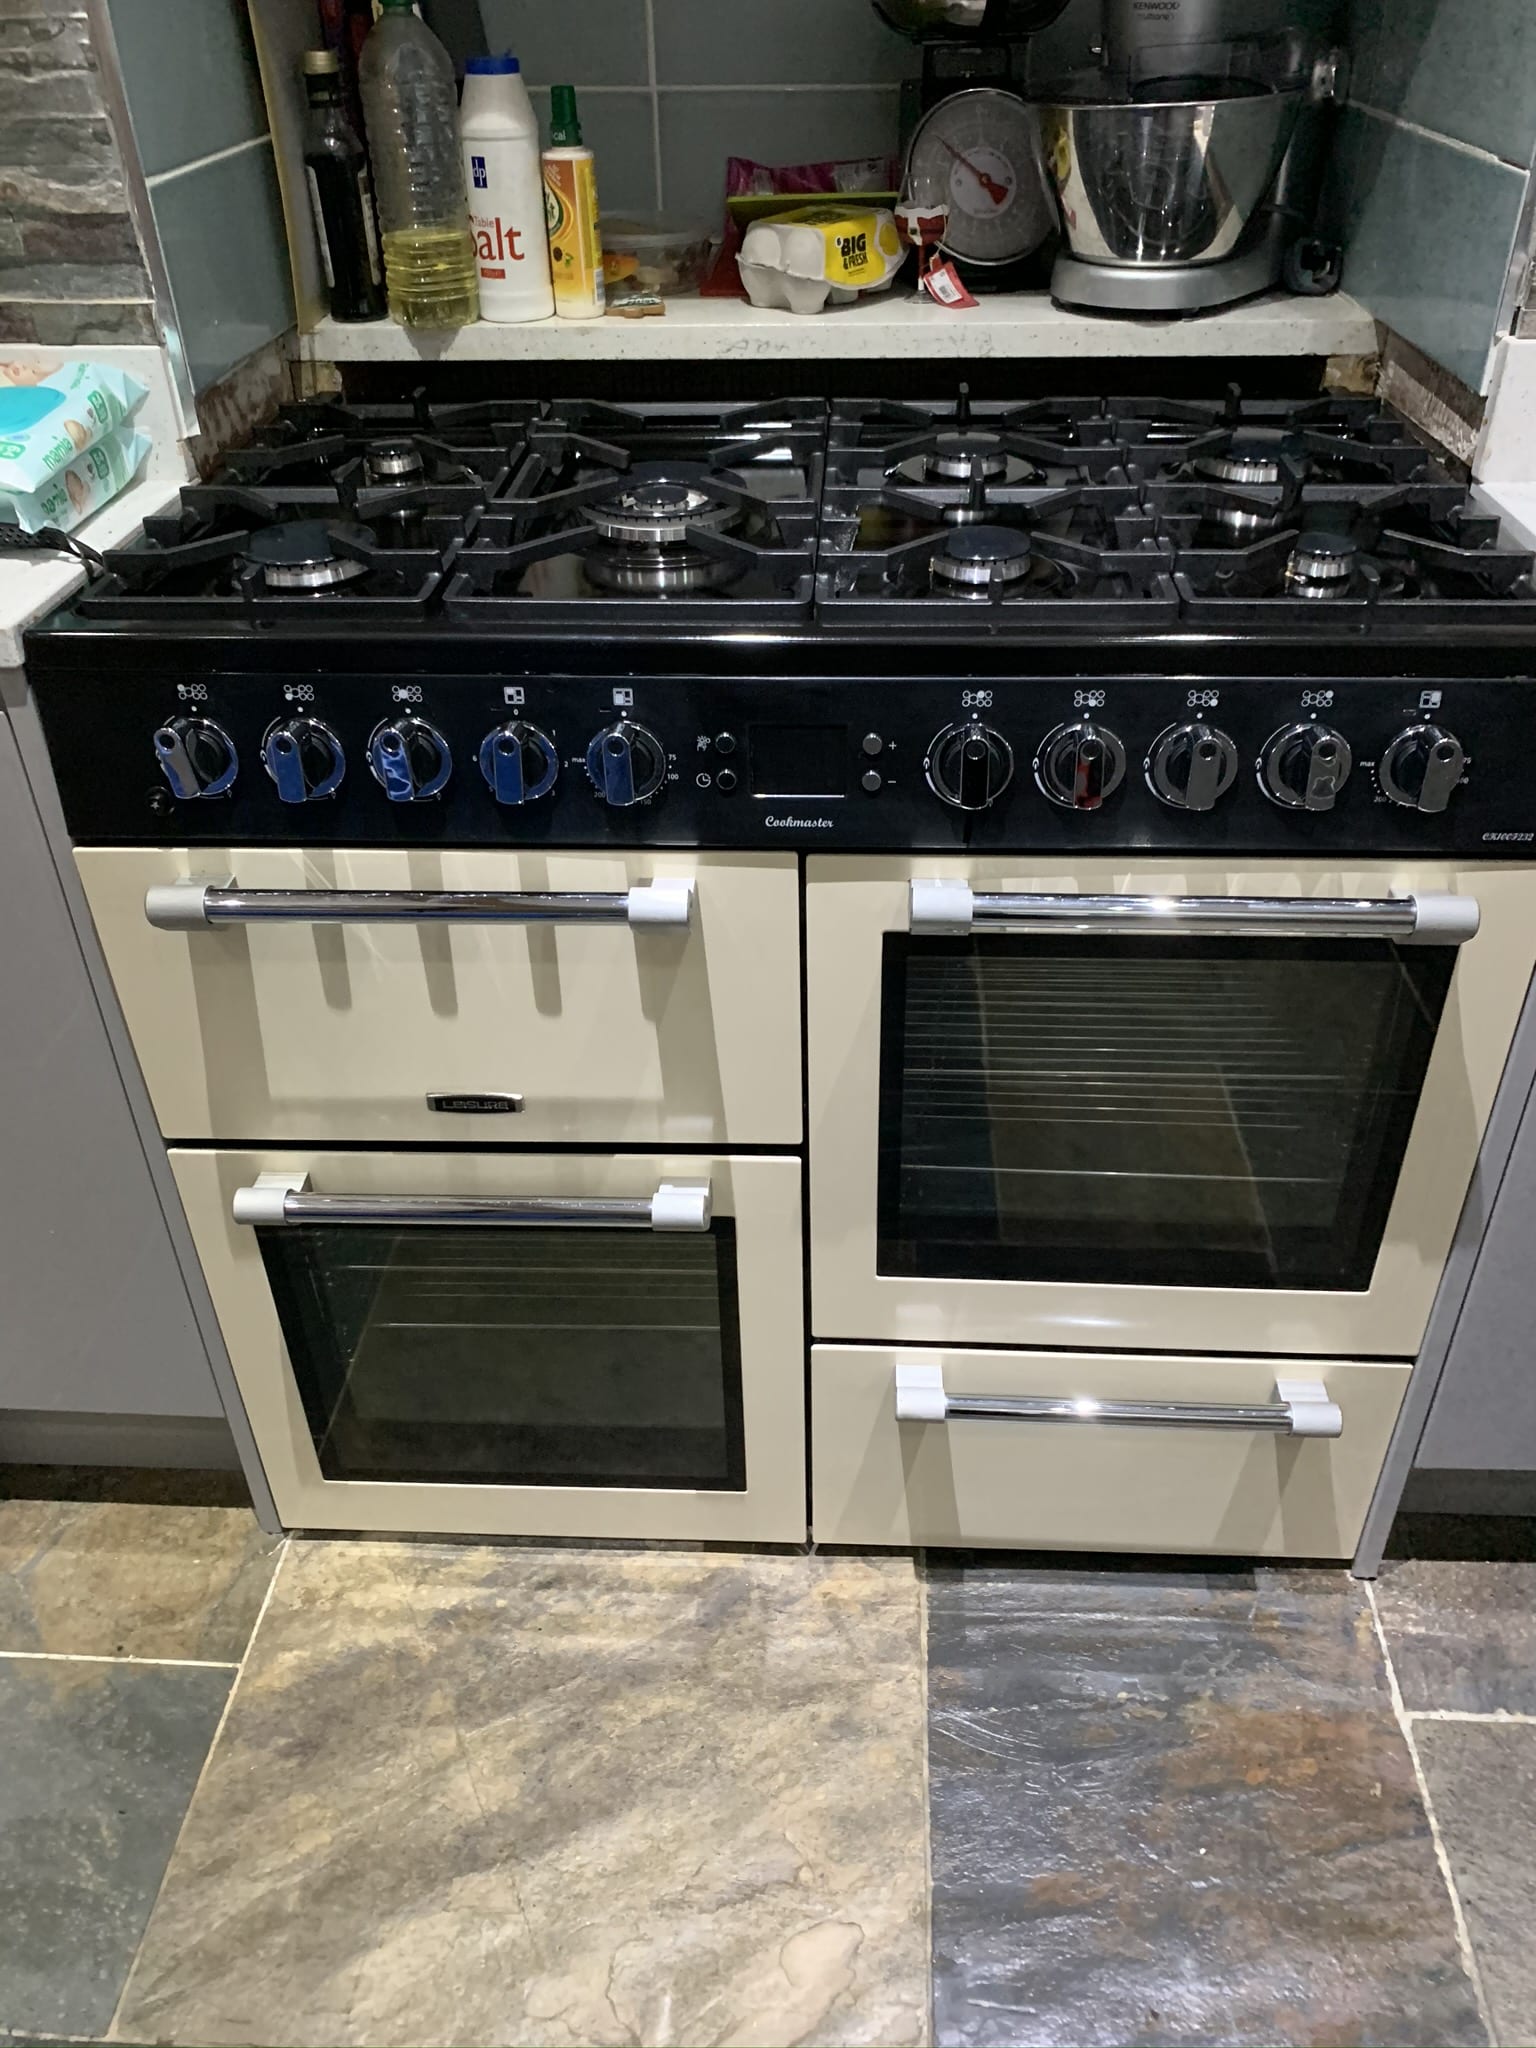 Oven Cleaning Range Oven Domestic Cleaning Services